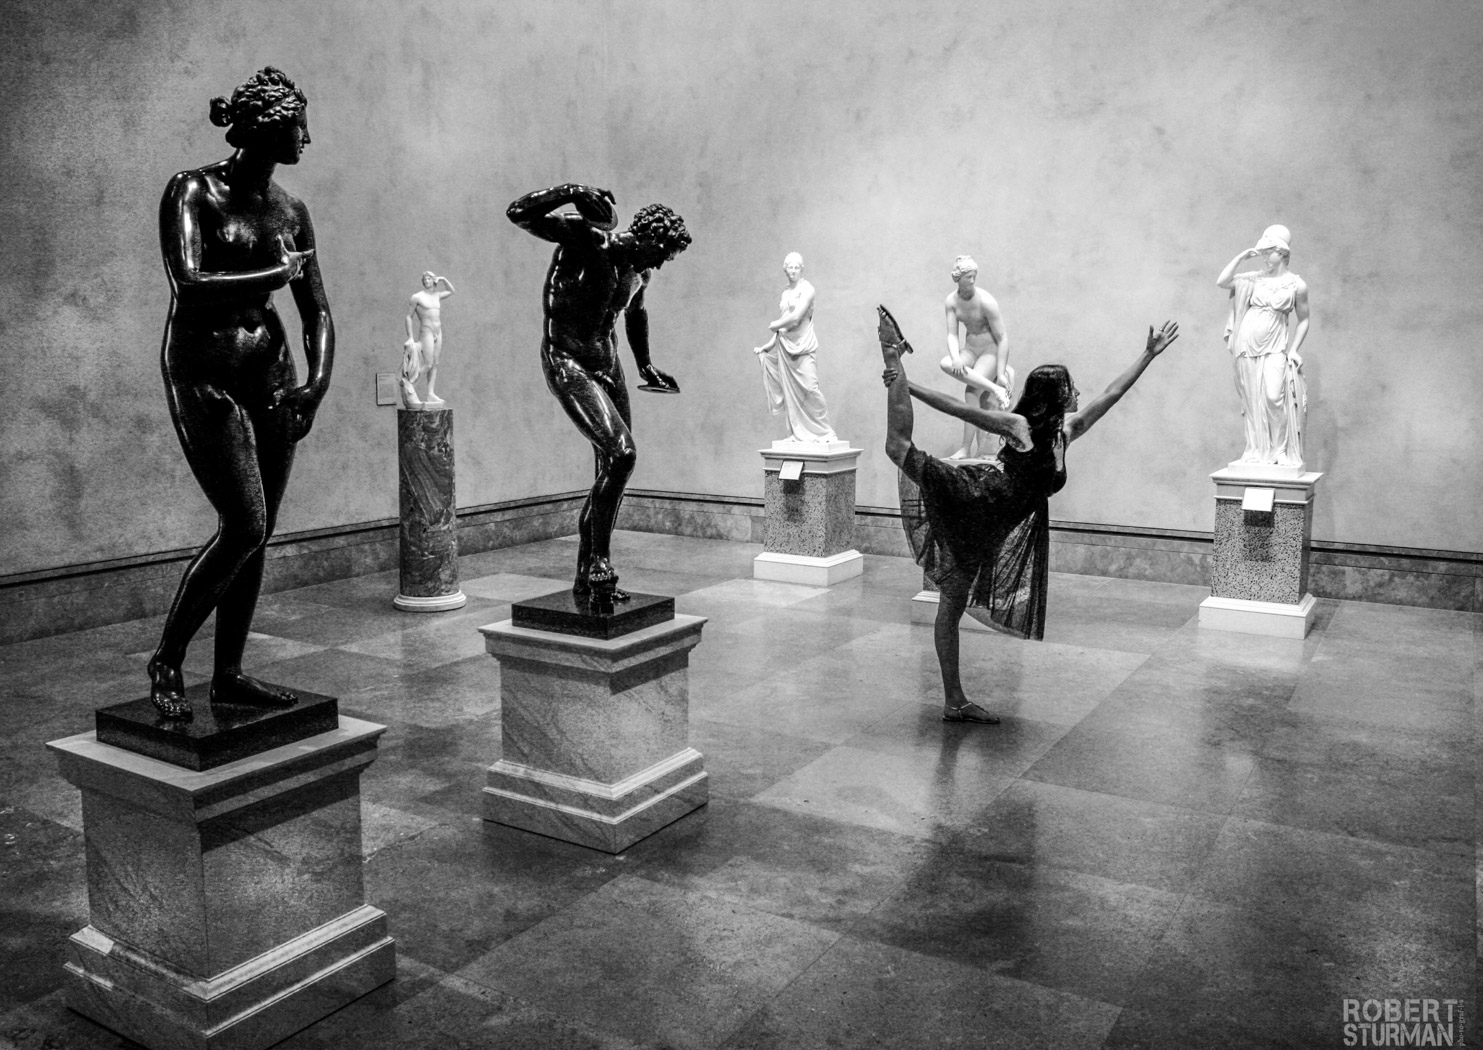 View of a ballet dancer in a room full of sculptures made in marble